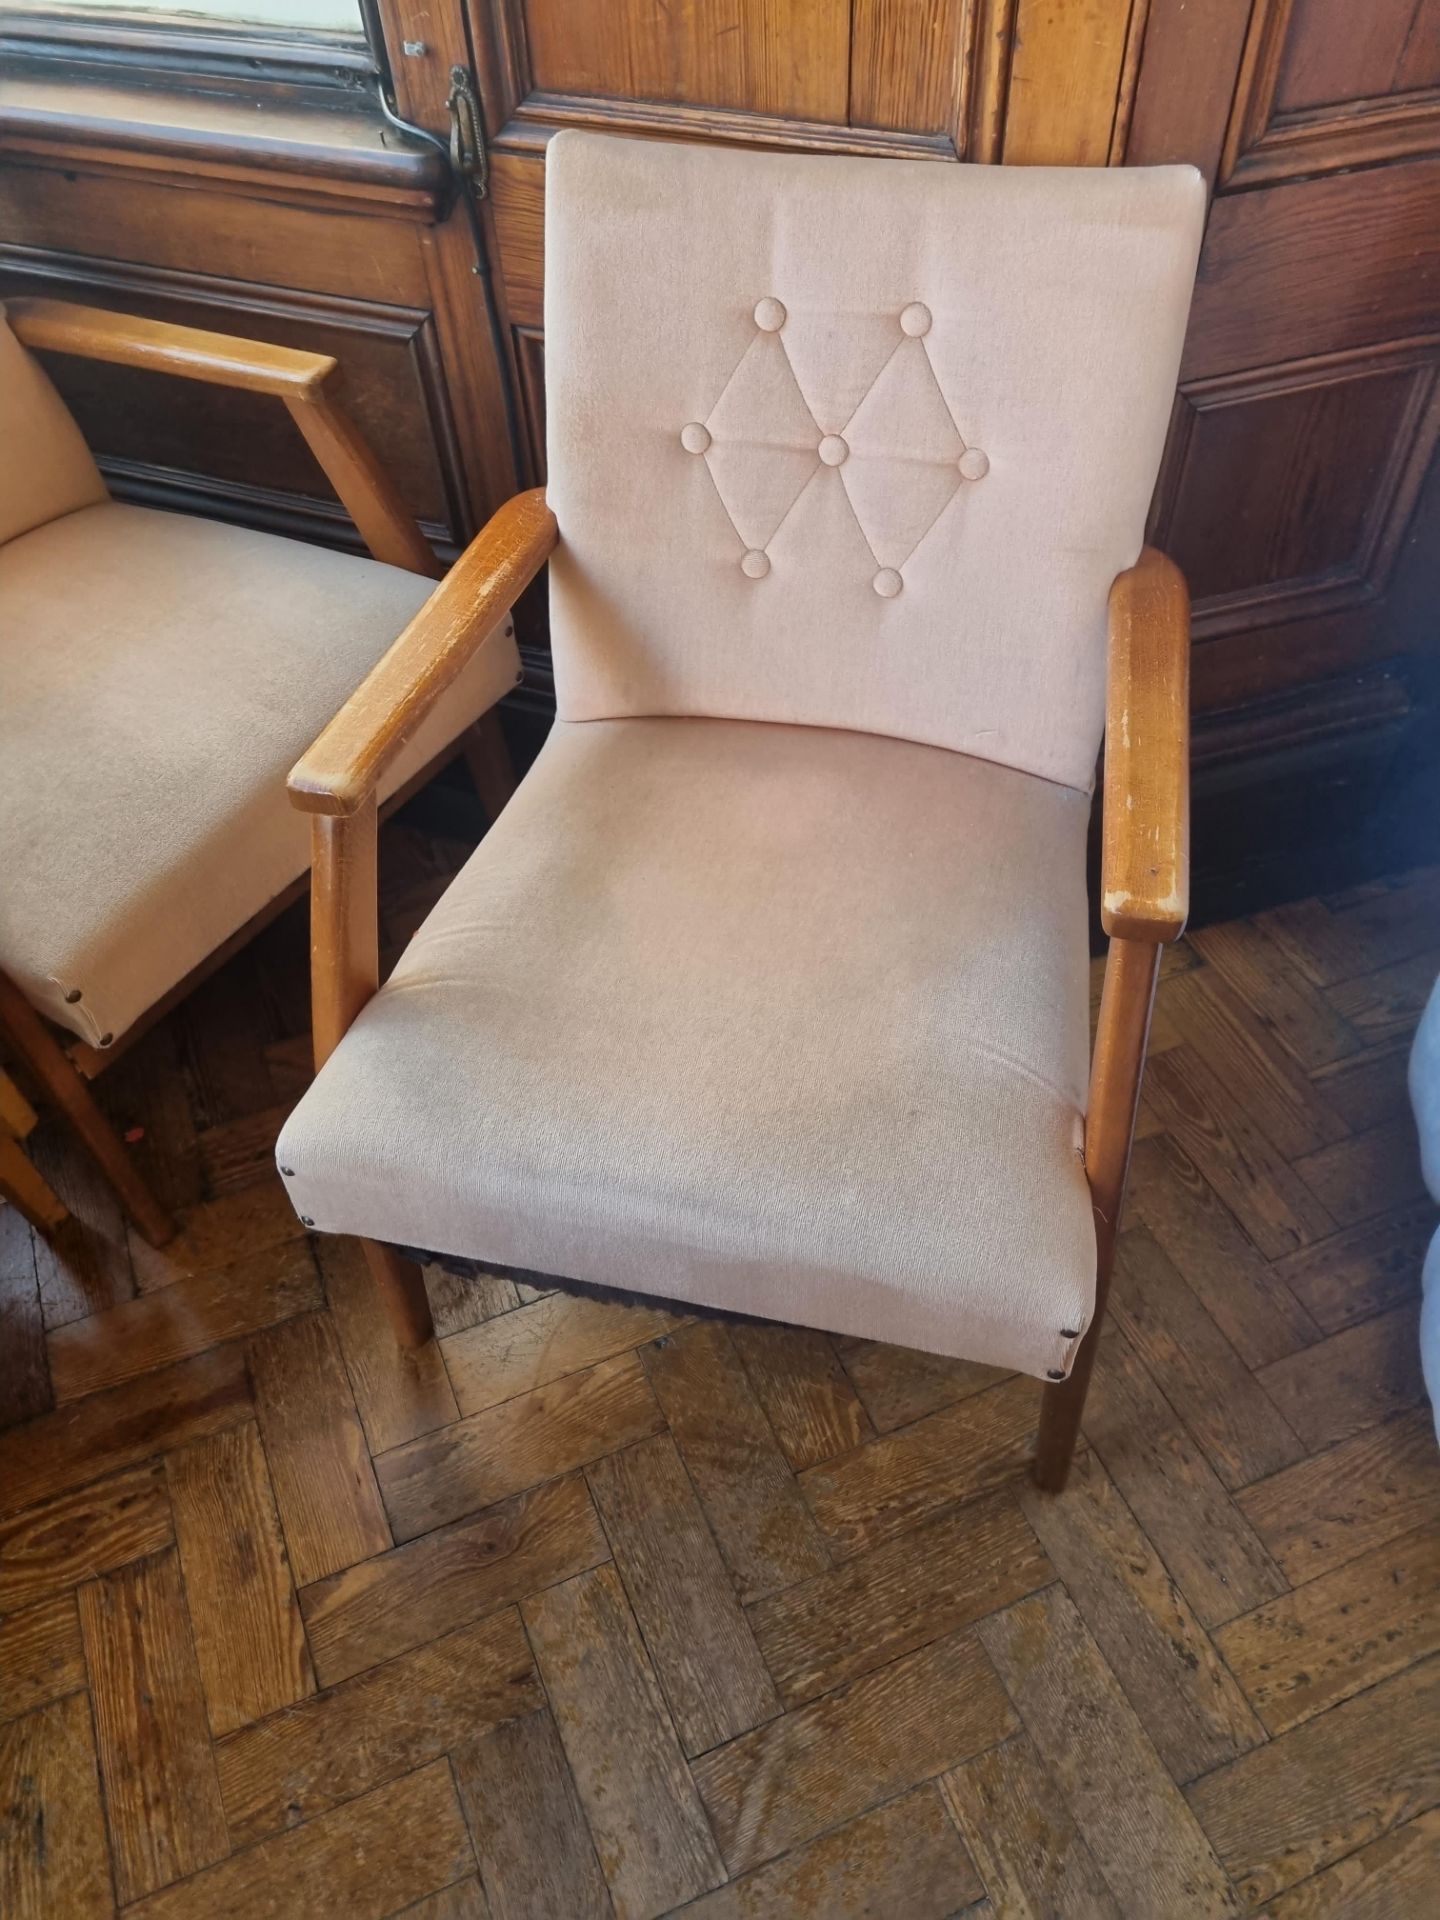 A Pair Of Wooden Beige Arm Chairs With Button Back Upholstery W 500mm D 460mm H 770mm - Image 2 of 2